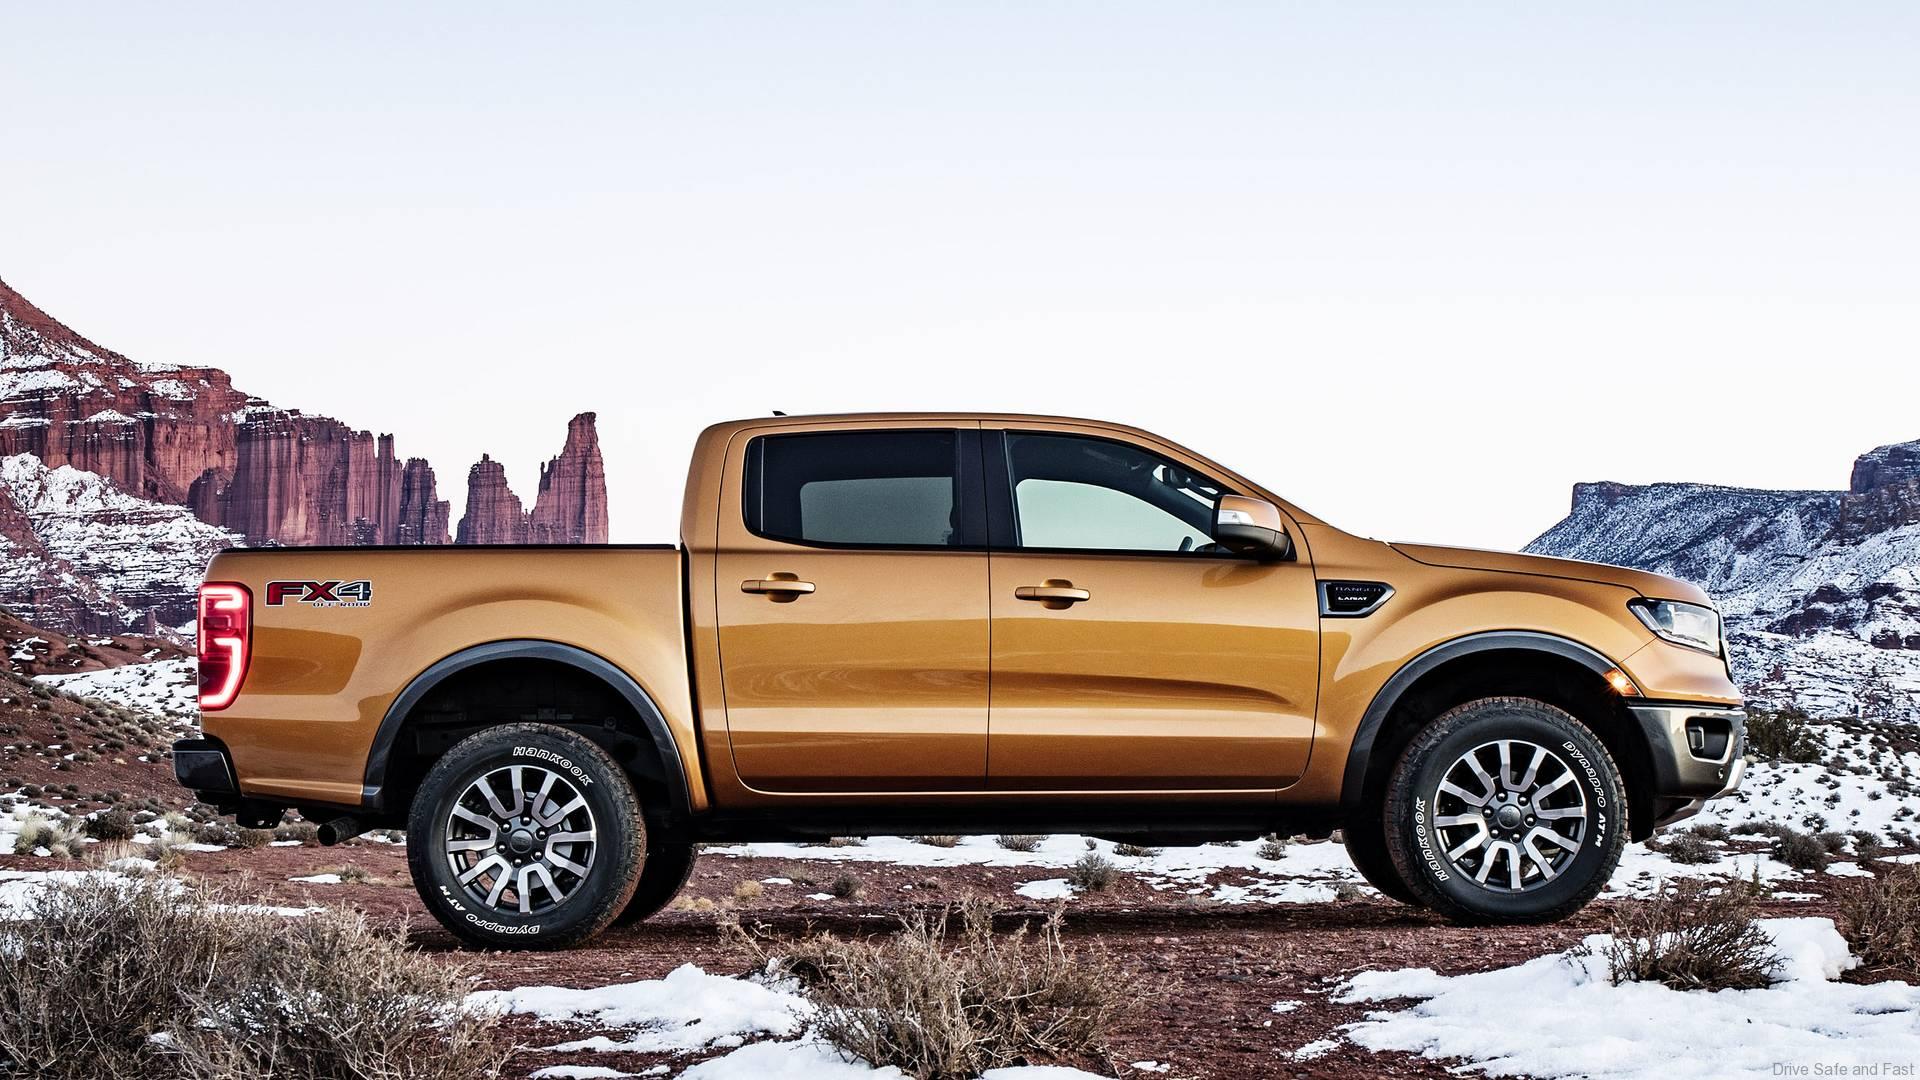 Ford Ranger for North America just released